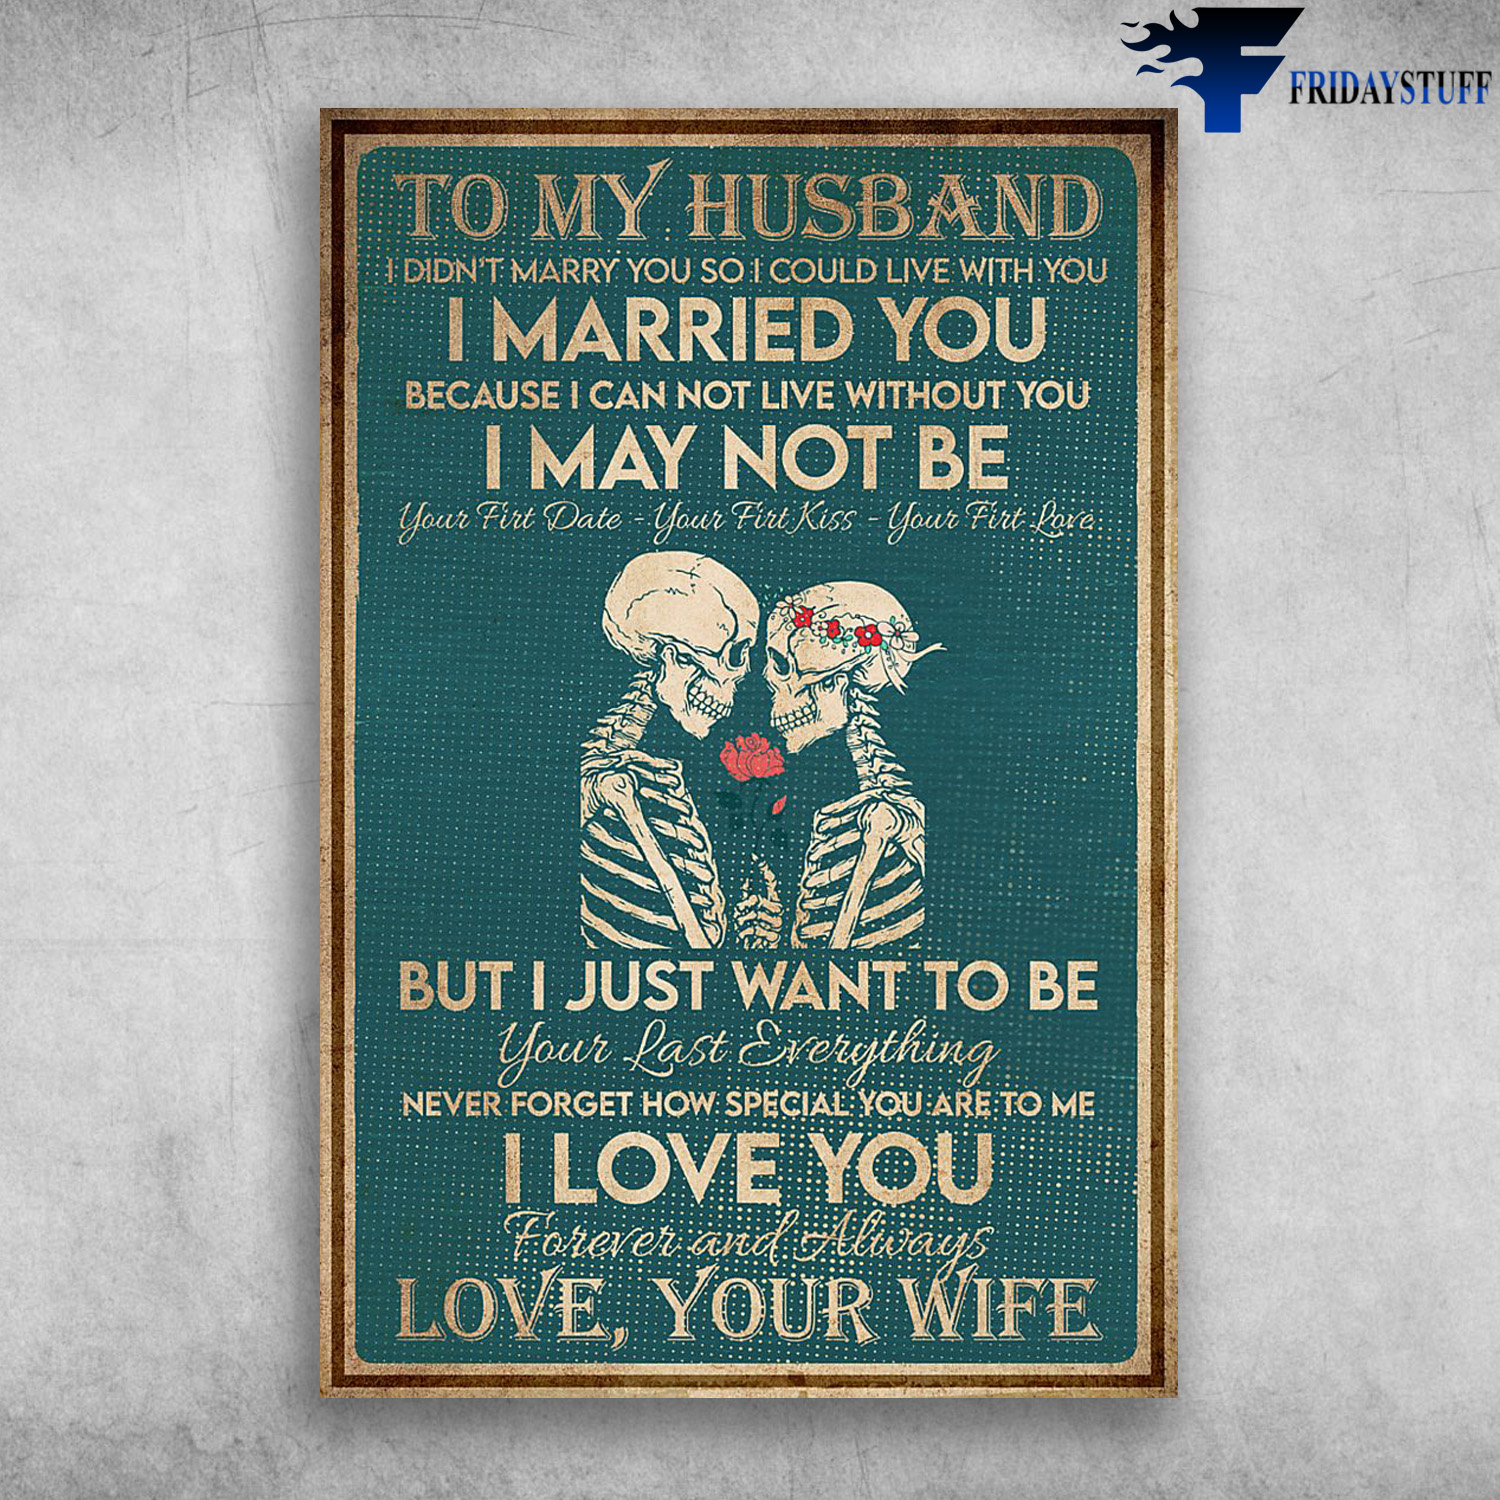 To My Husband I Didn't Marry You So I Could Live With You I Married You